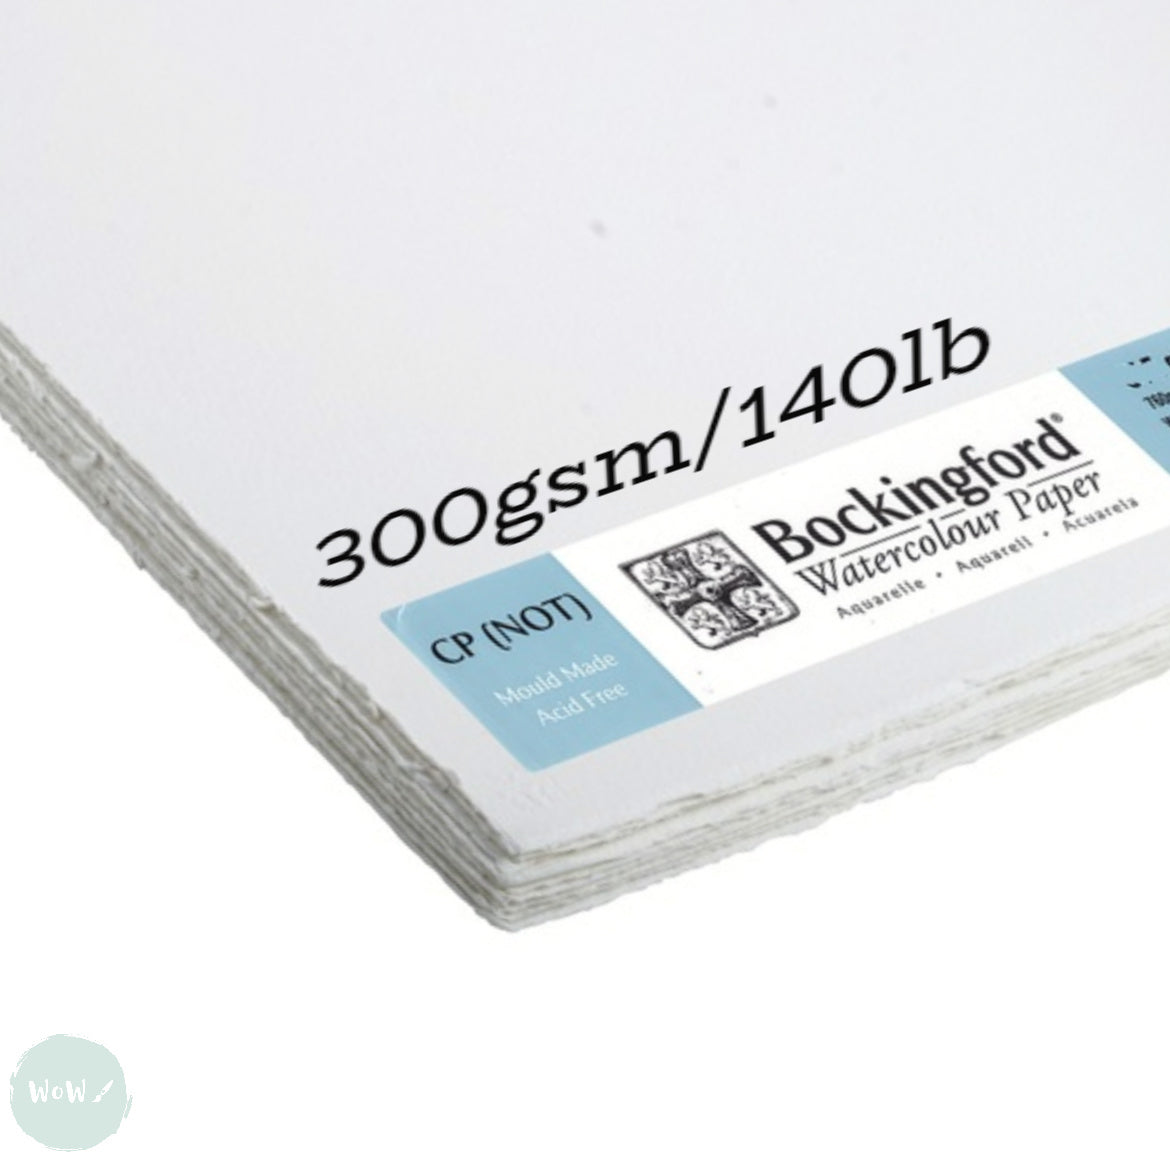 Bockingford Watercolour Paper Block Cold Pressed (NOT) 300gsm 12 Sheets